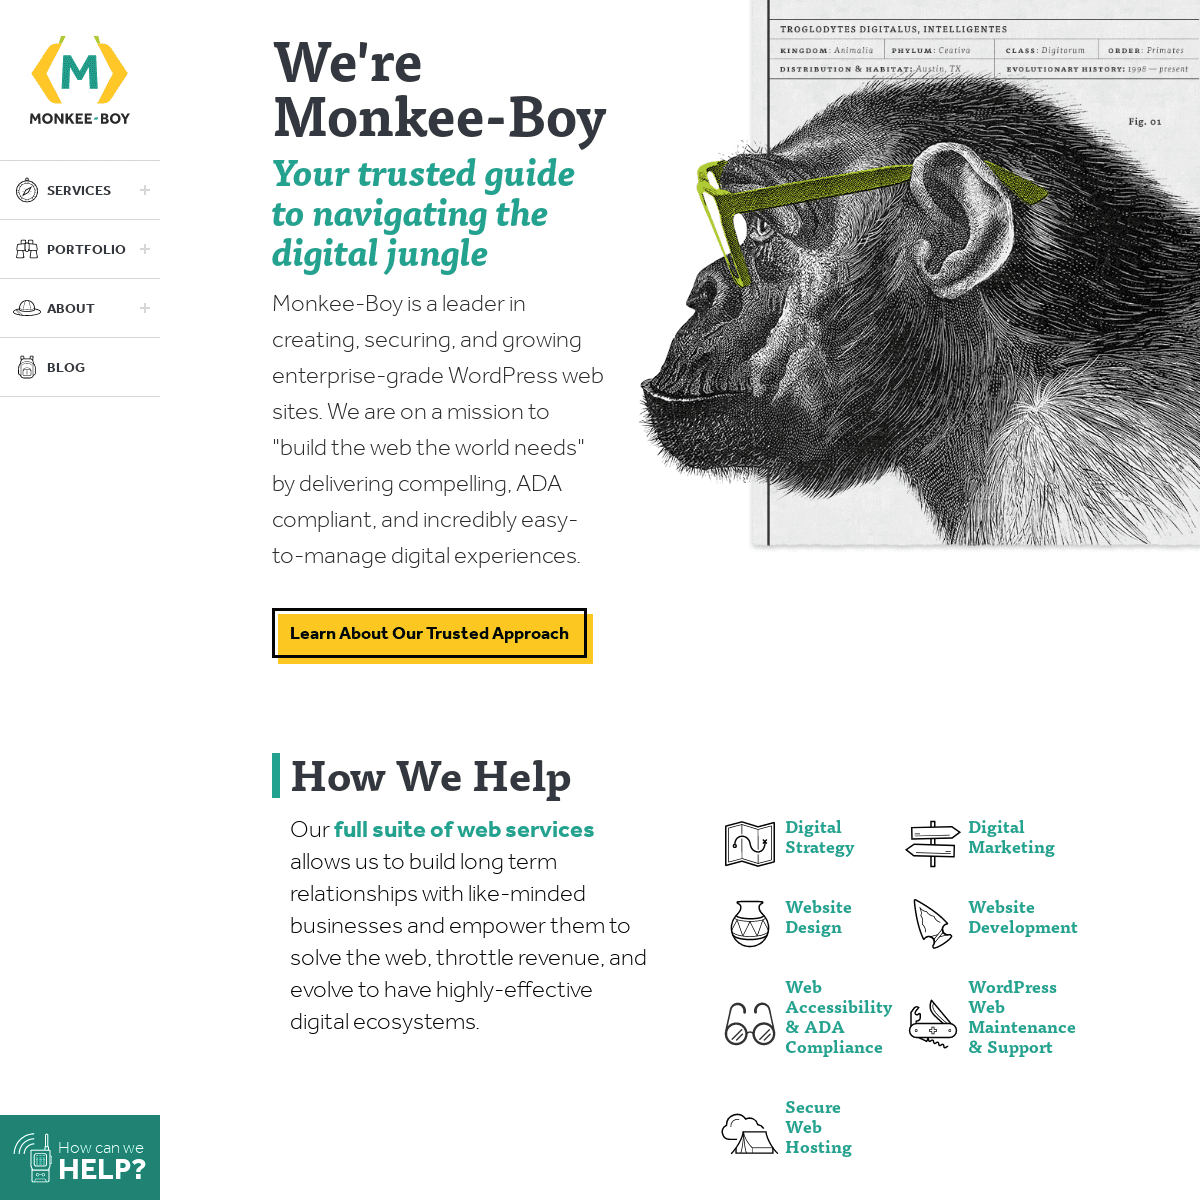 A complete backup of https://monkee-boy.com